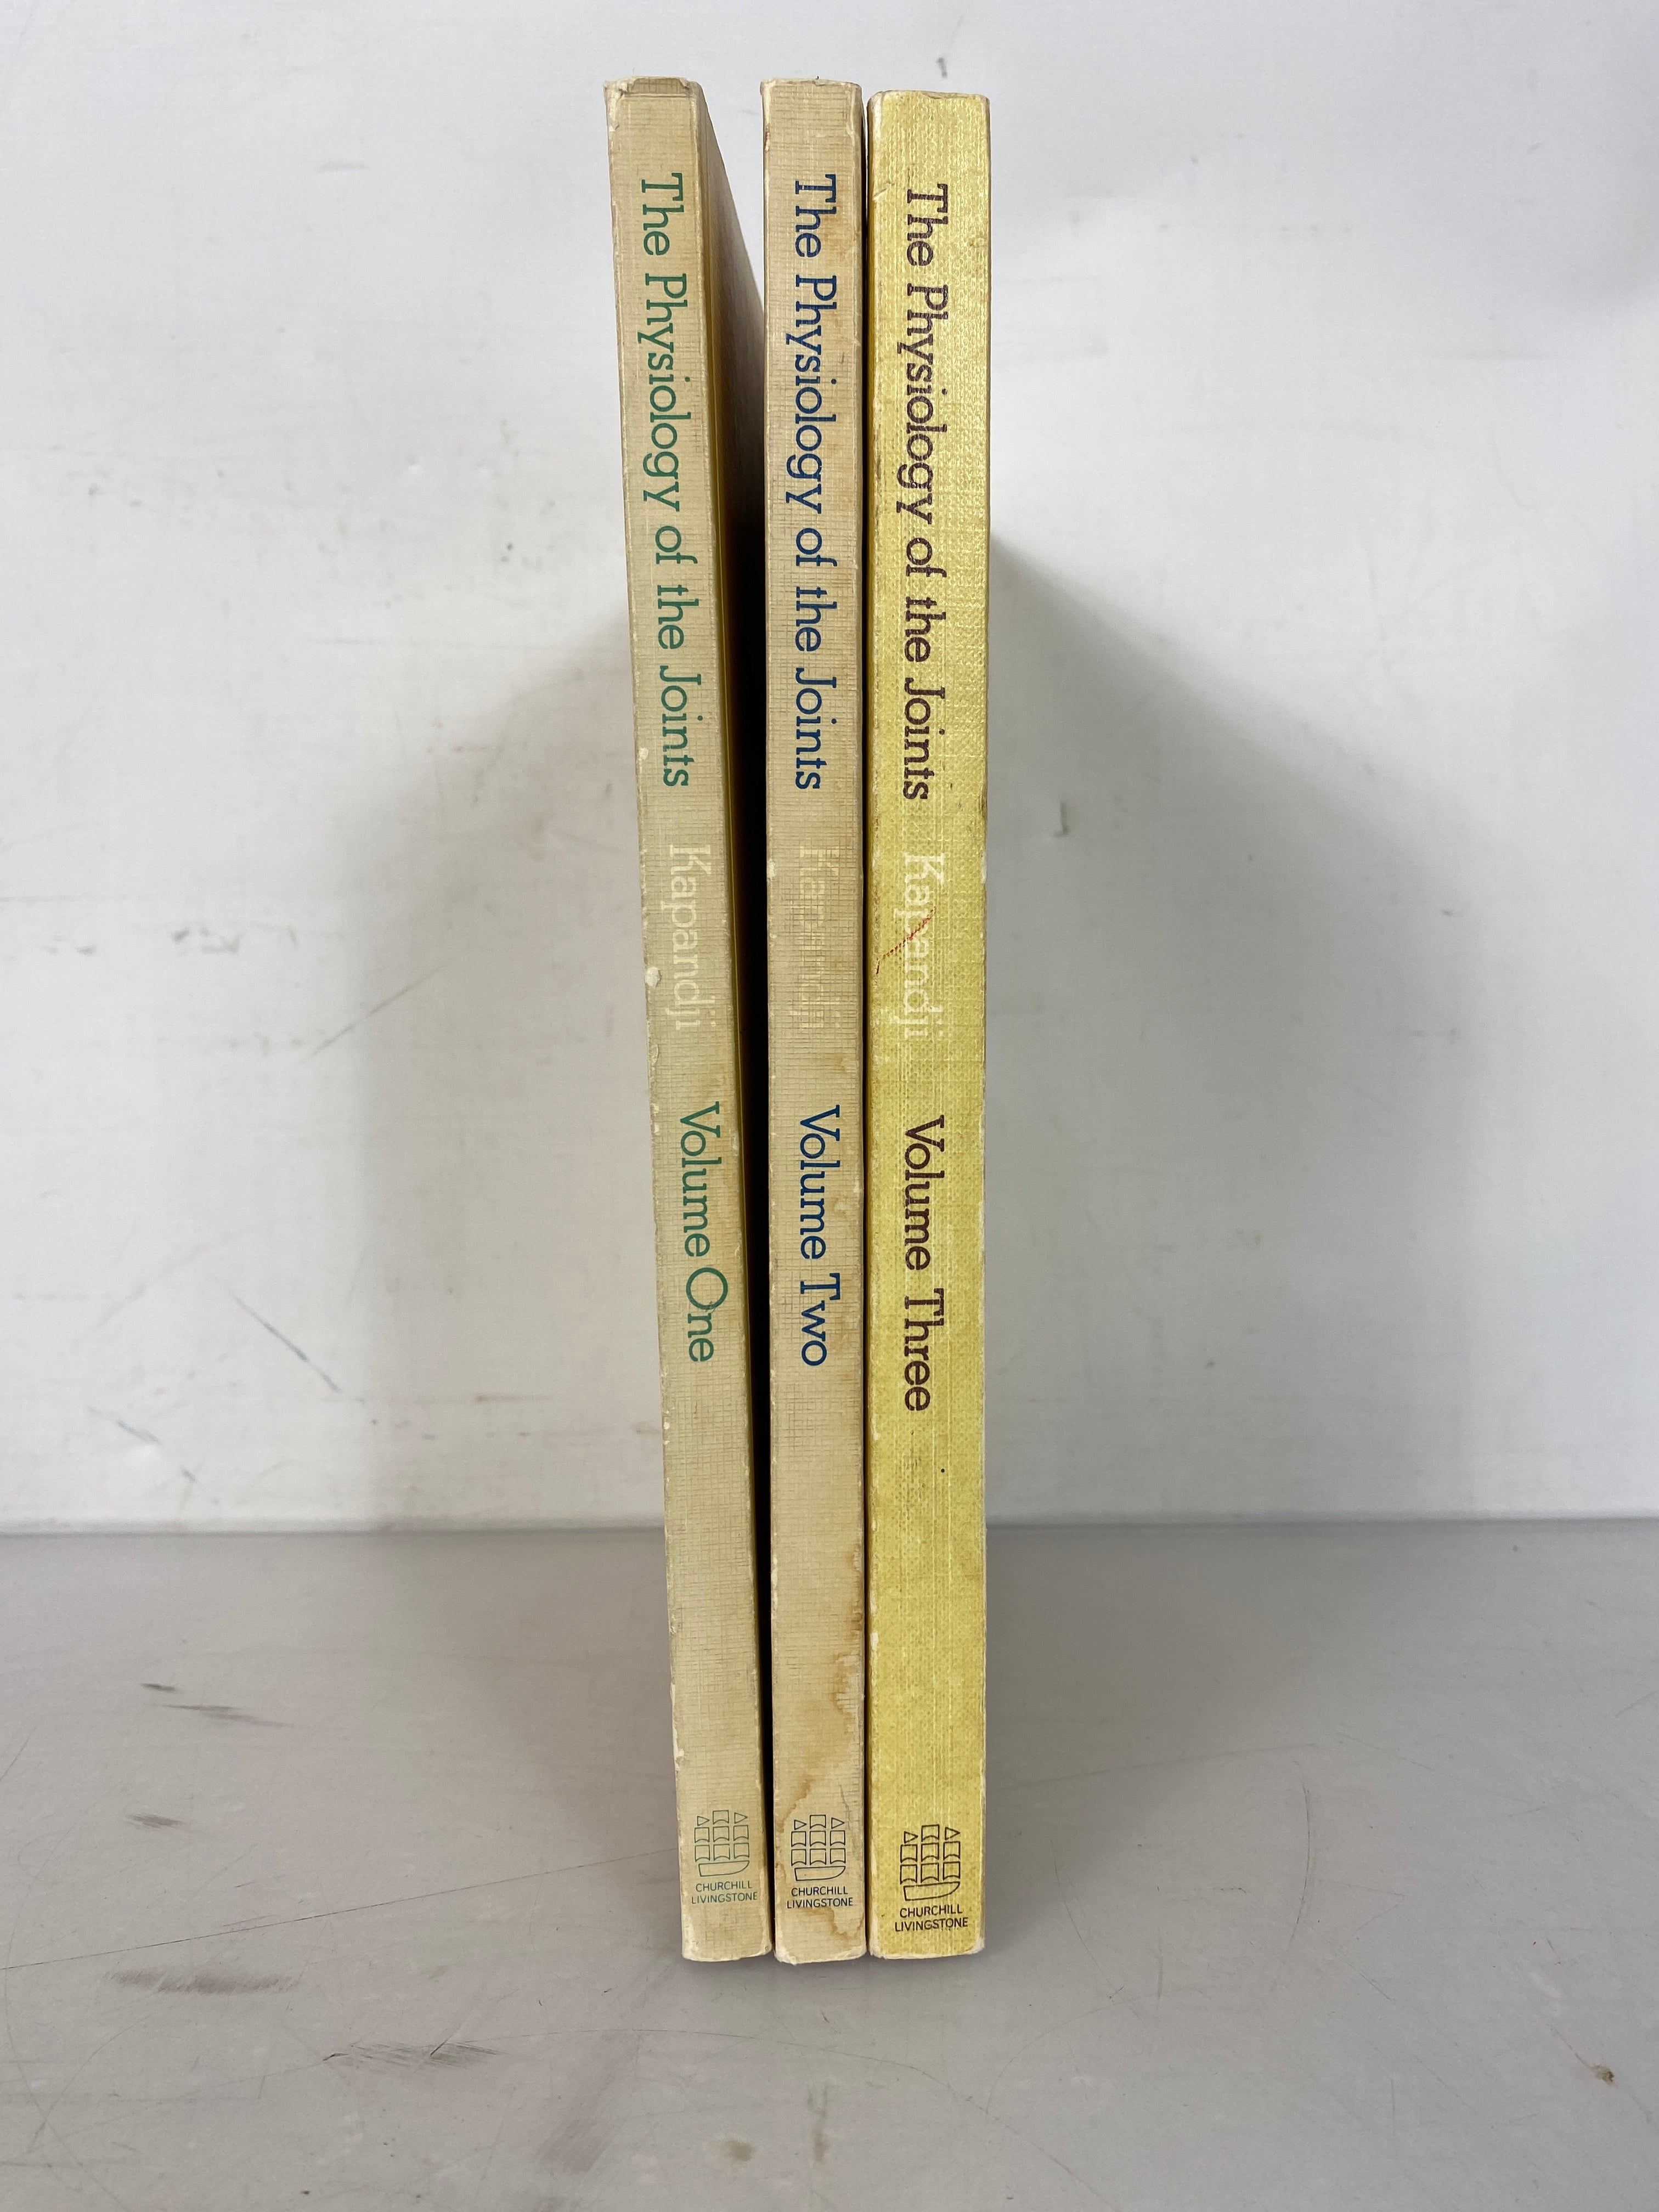 Complete 3 Volume Set The Physiology of the Joints by Kapandji Second Edition SC